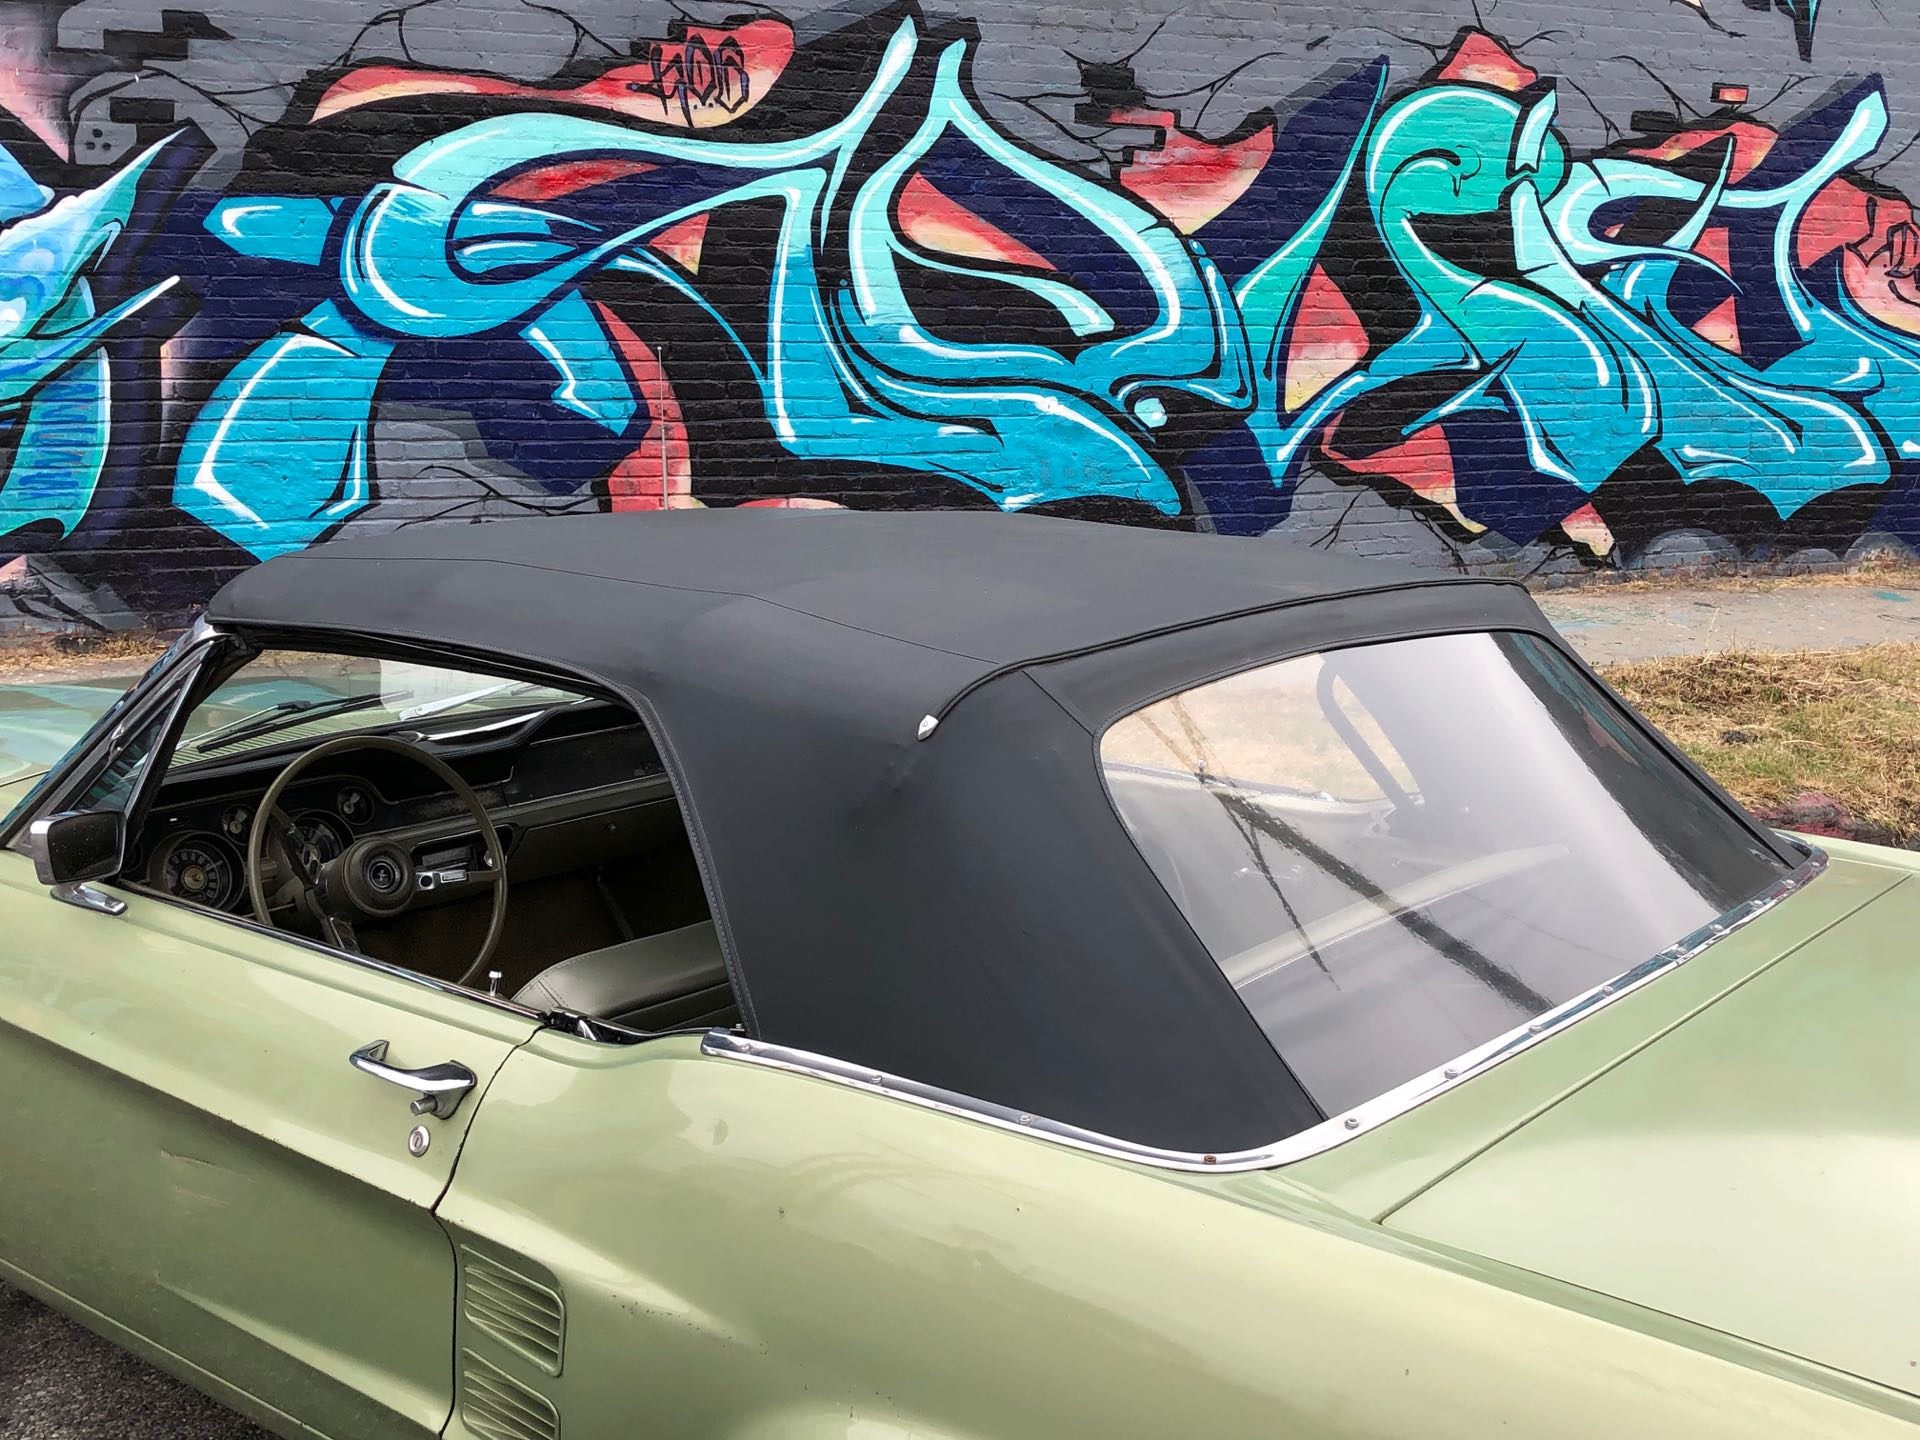 Used 1967 Ford Mustang